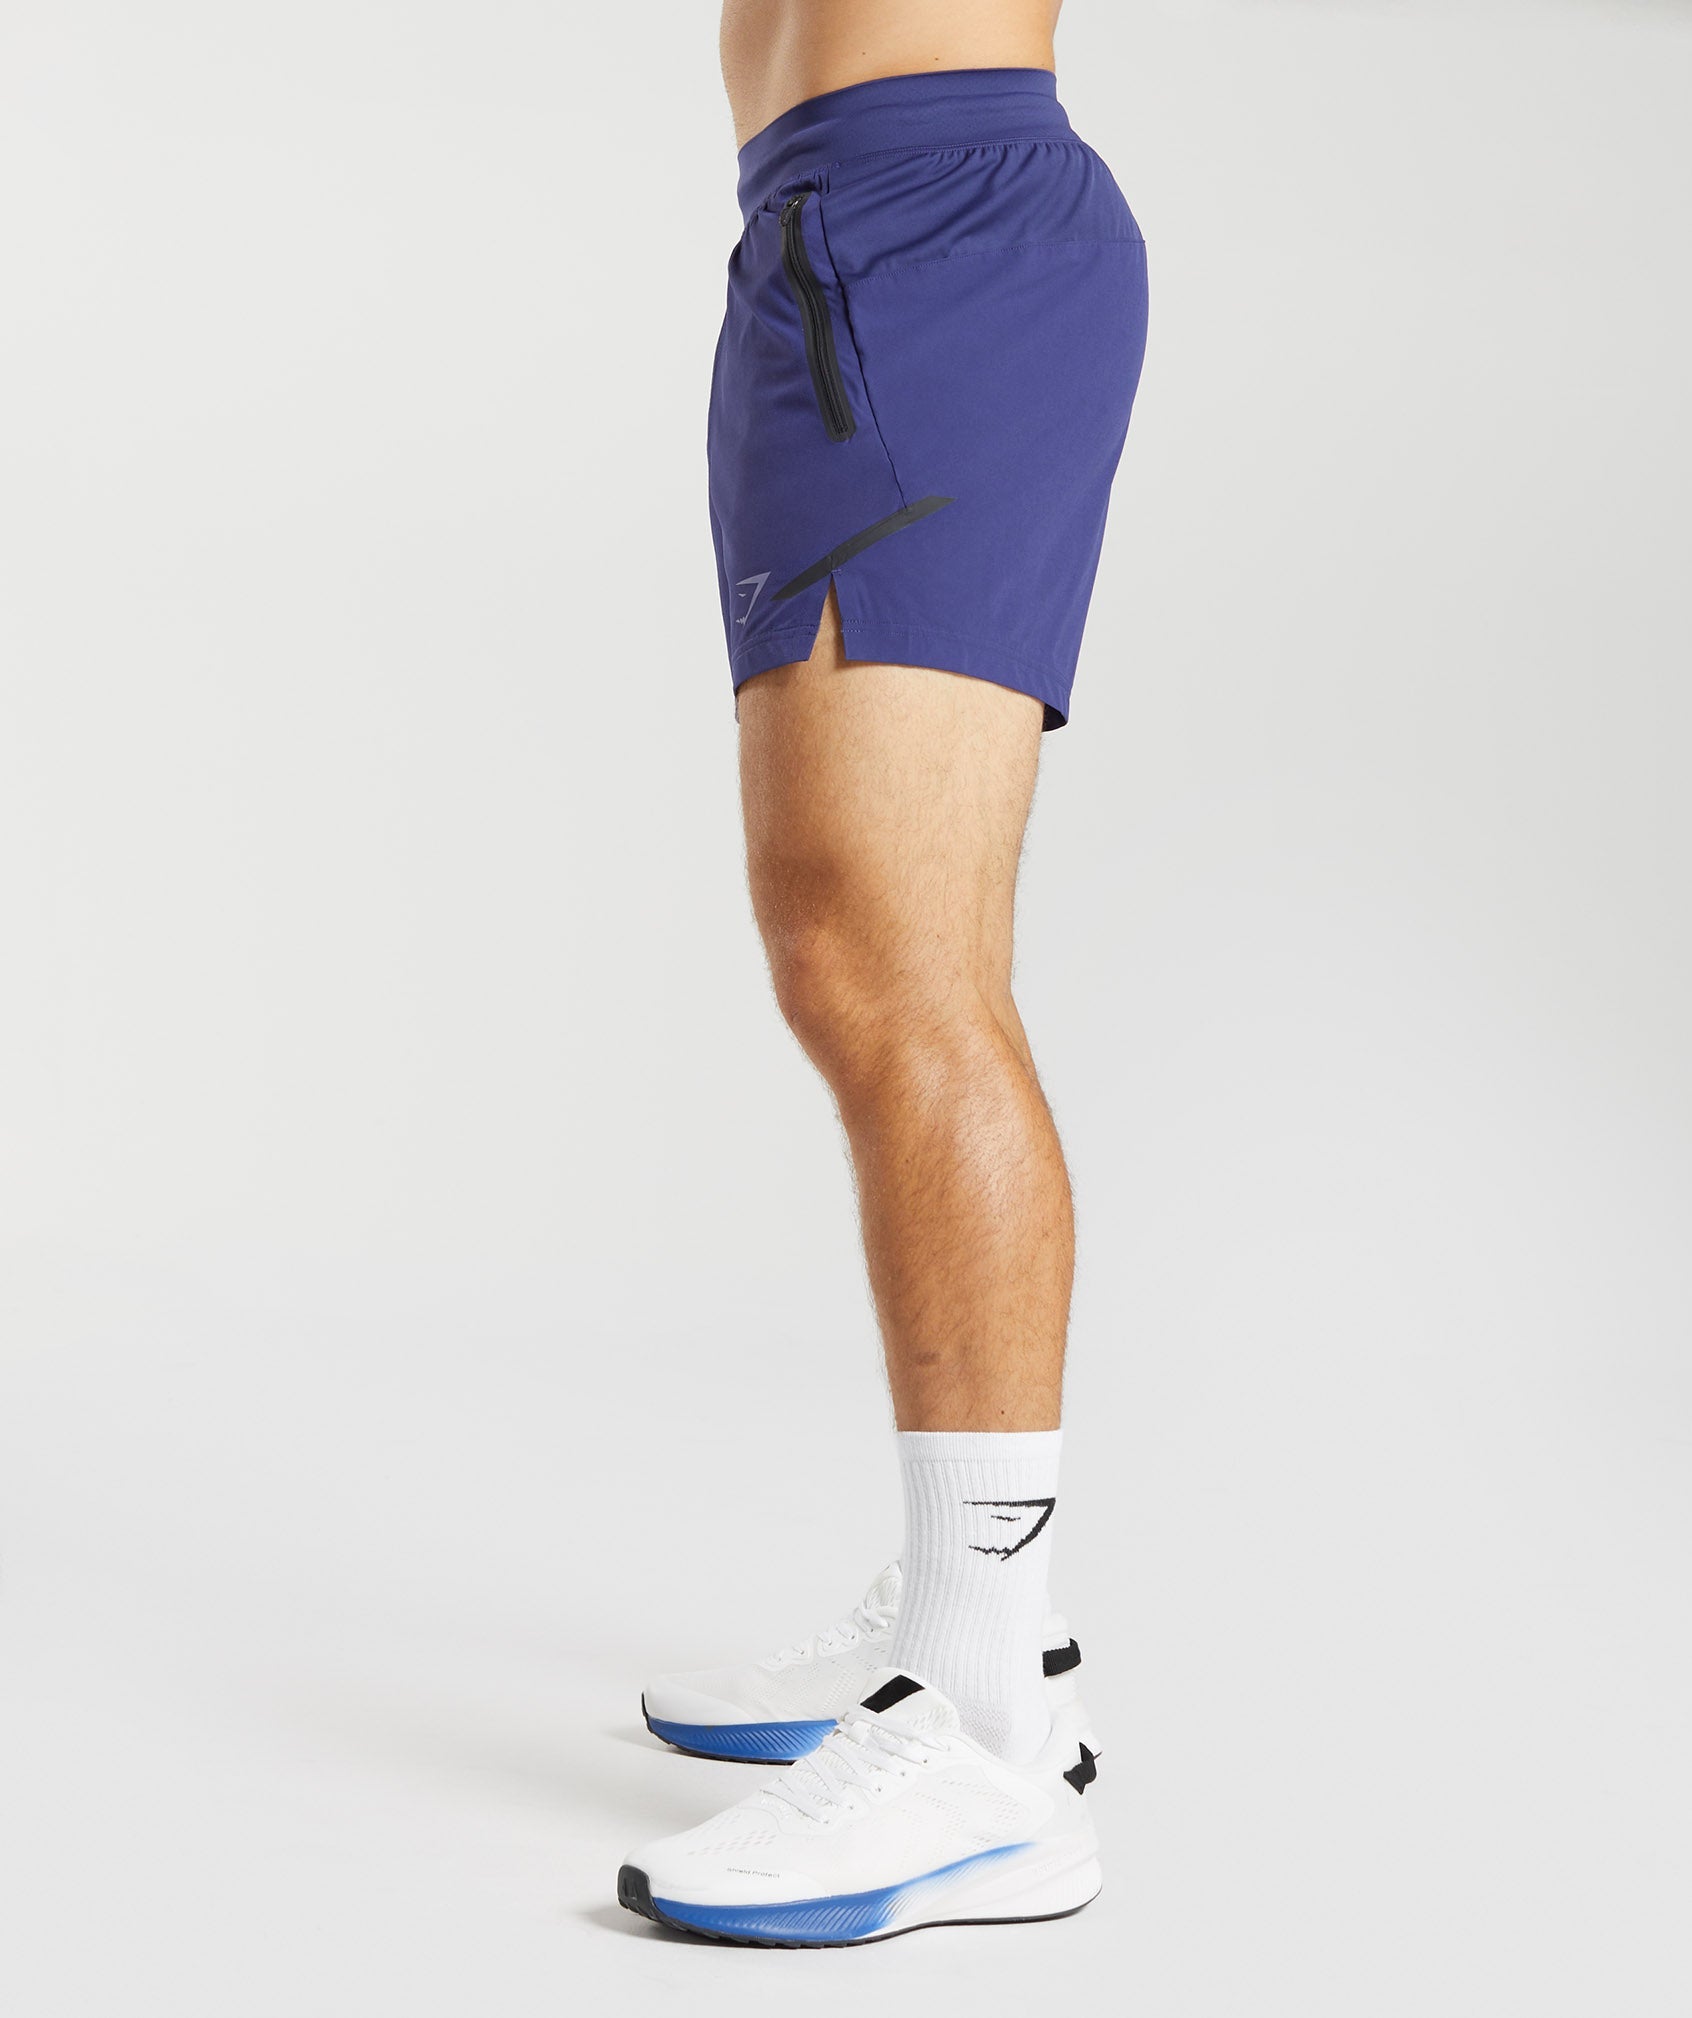 Apex 5" Perform Shorts in Neptune Purple - view 3